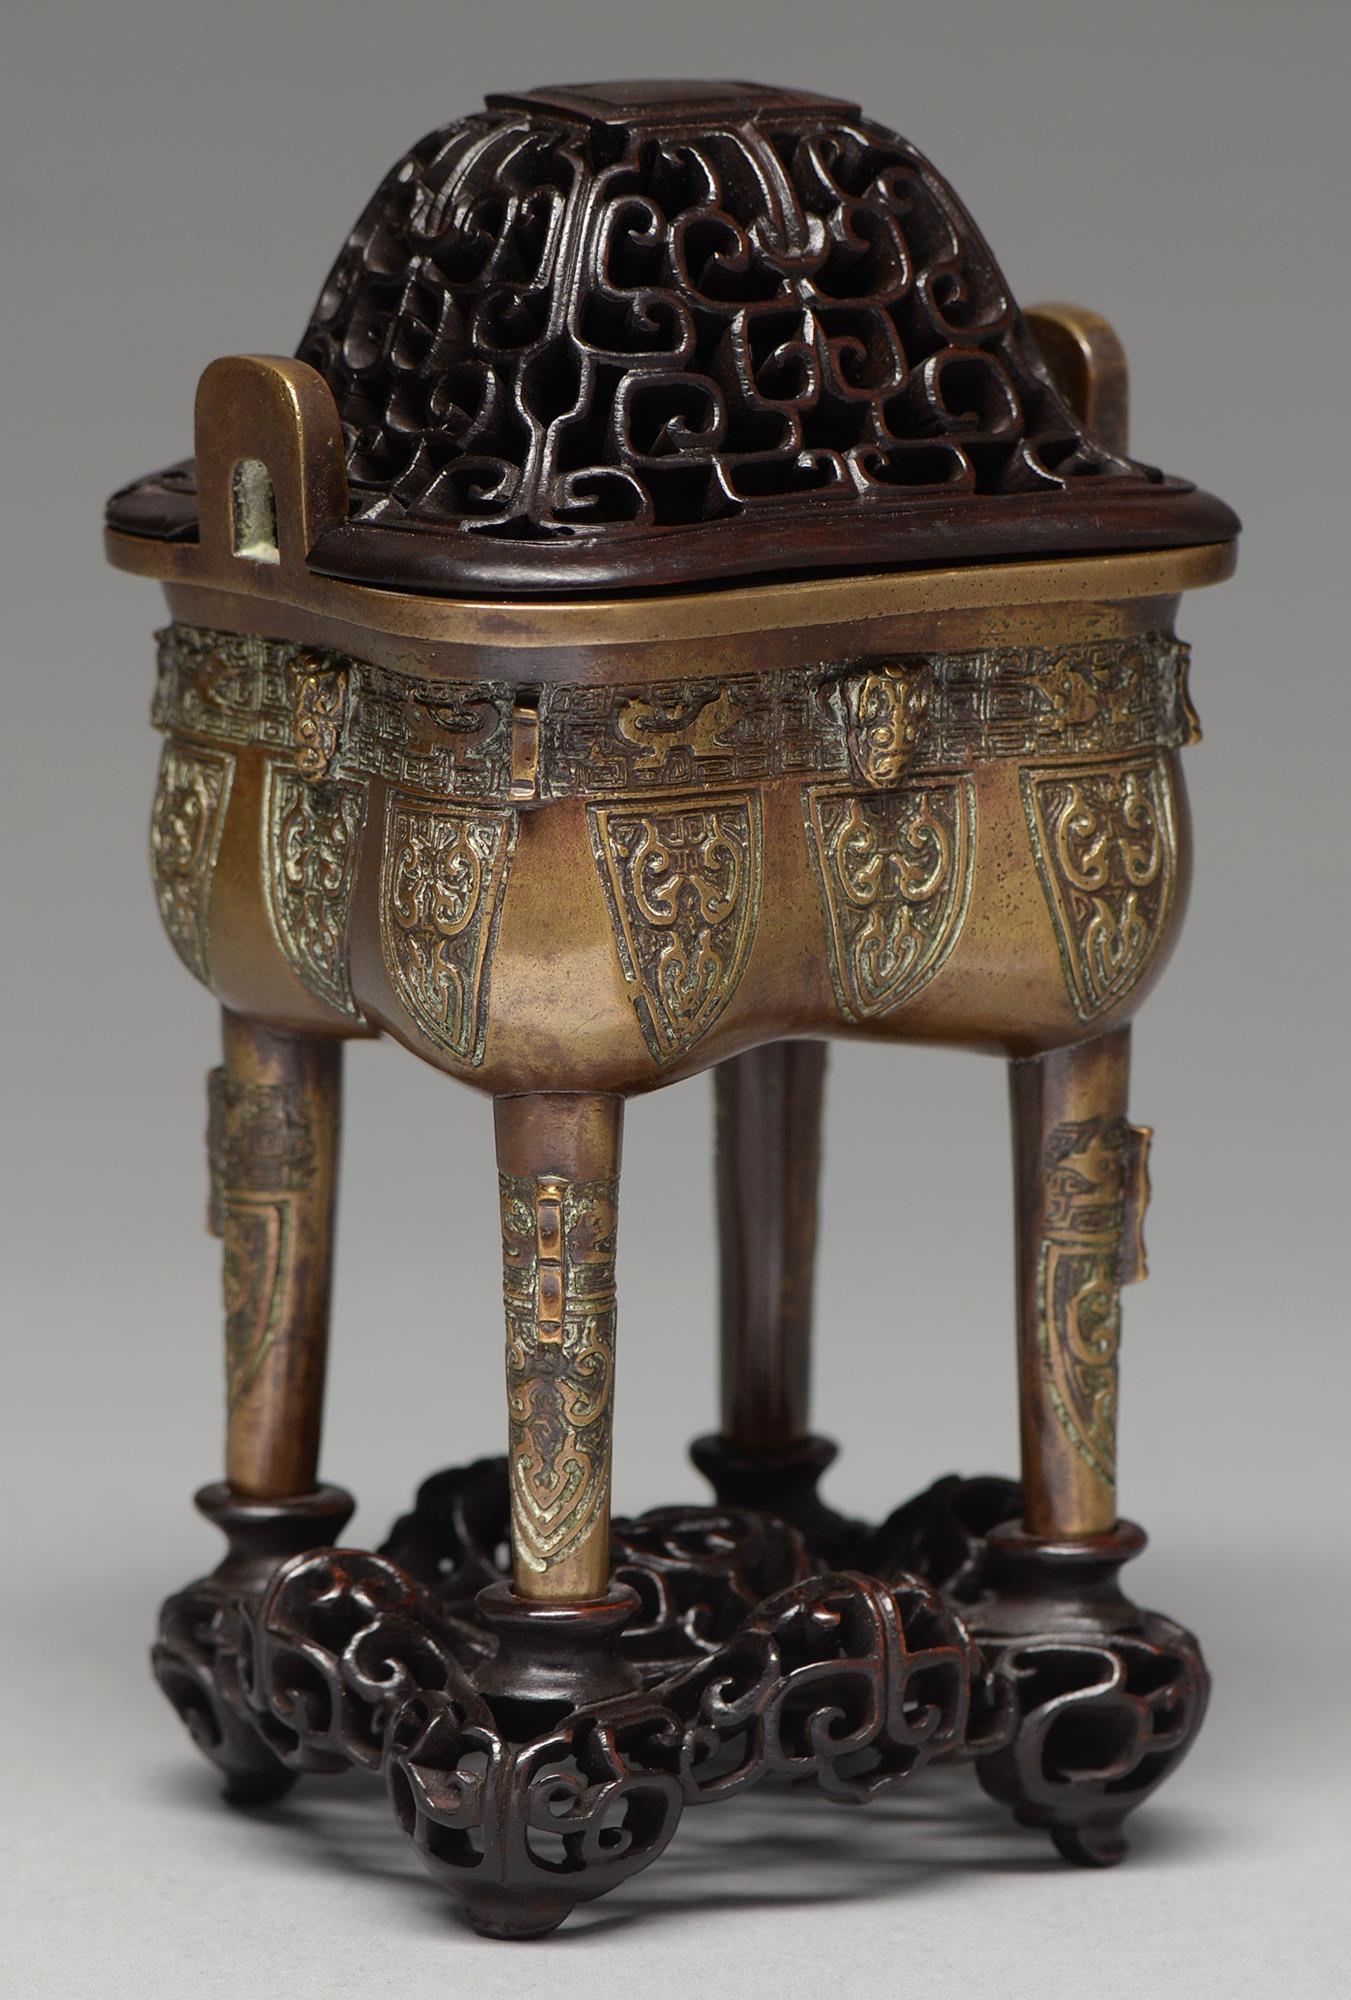 A Chinese bronze archaistic vessel, Ding, 20th c, the sides cast with mask and stylised animals on - Image 2 of 3